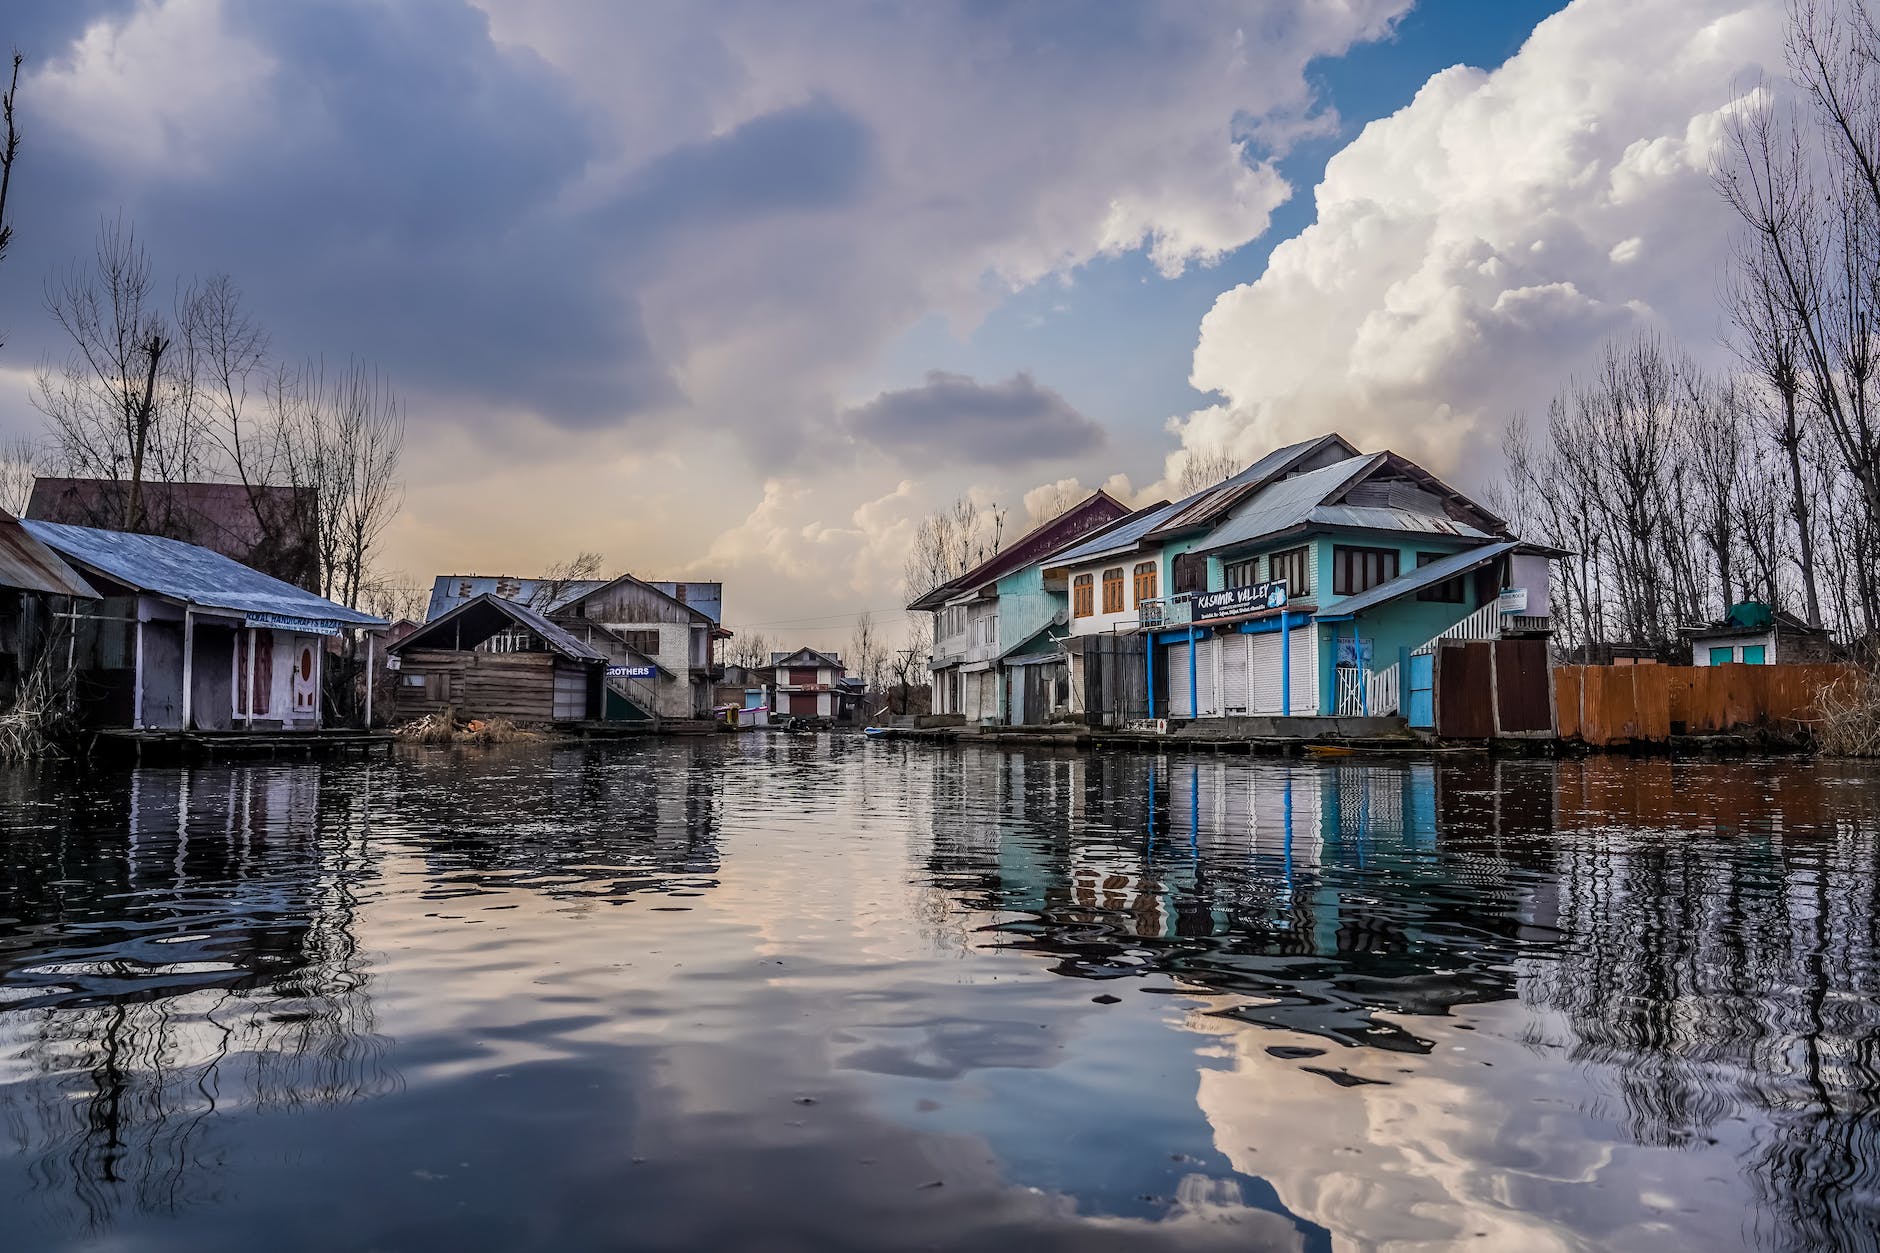 blue and white wooden houses beside river under blue and white cloudy sky